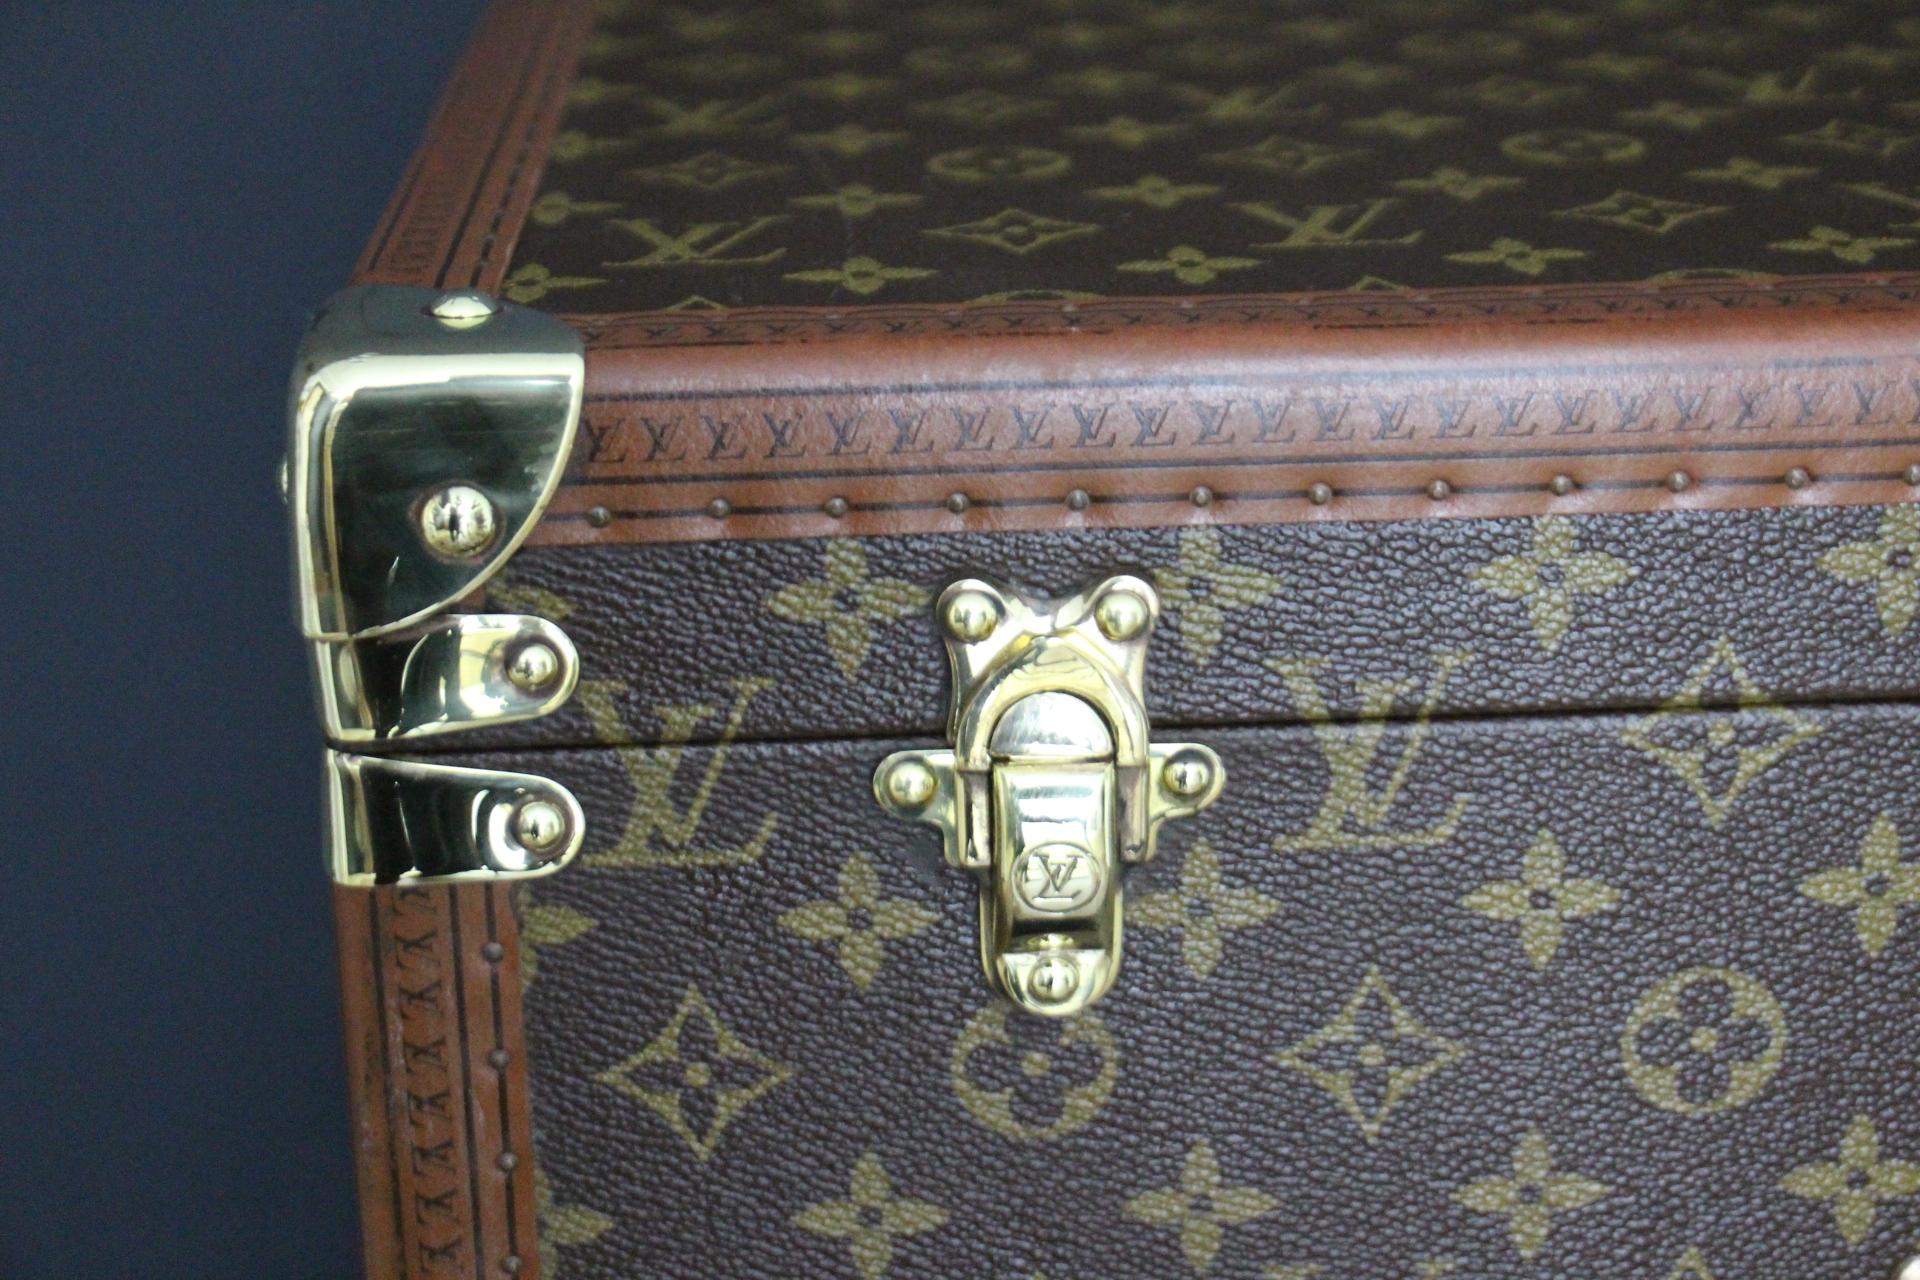 This very nice all original Louis Vuitton monogram suitcase features all solid brass fittings, solid brass LV stamped main lock and clasps. Its trims are marked Louis Vuitton all around. It has got a very comfortable round leather handle, gently